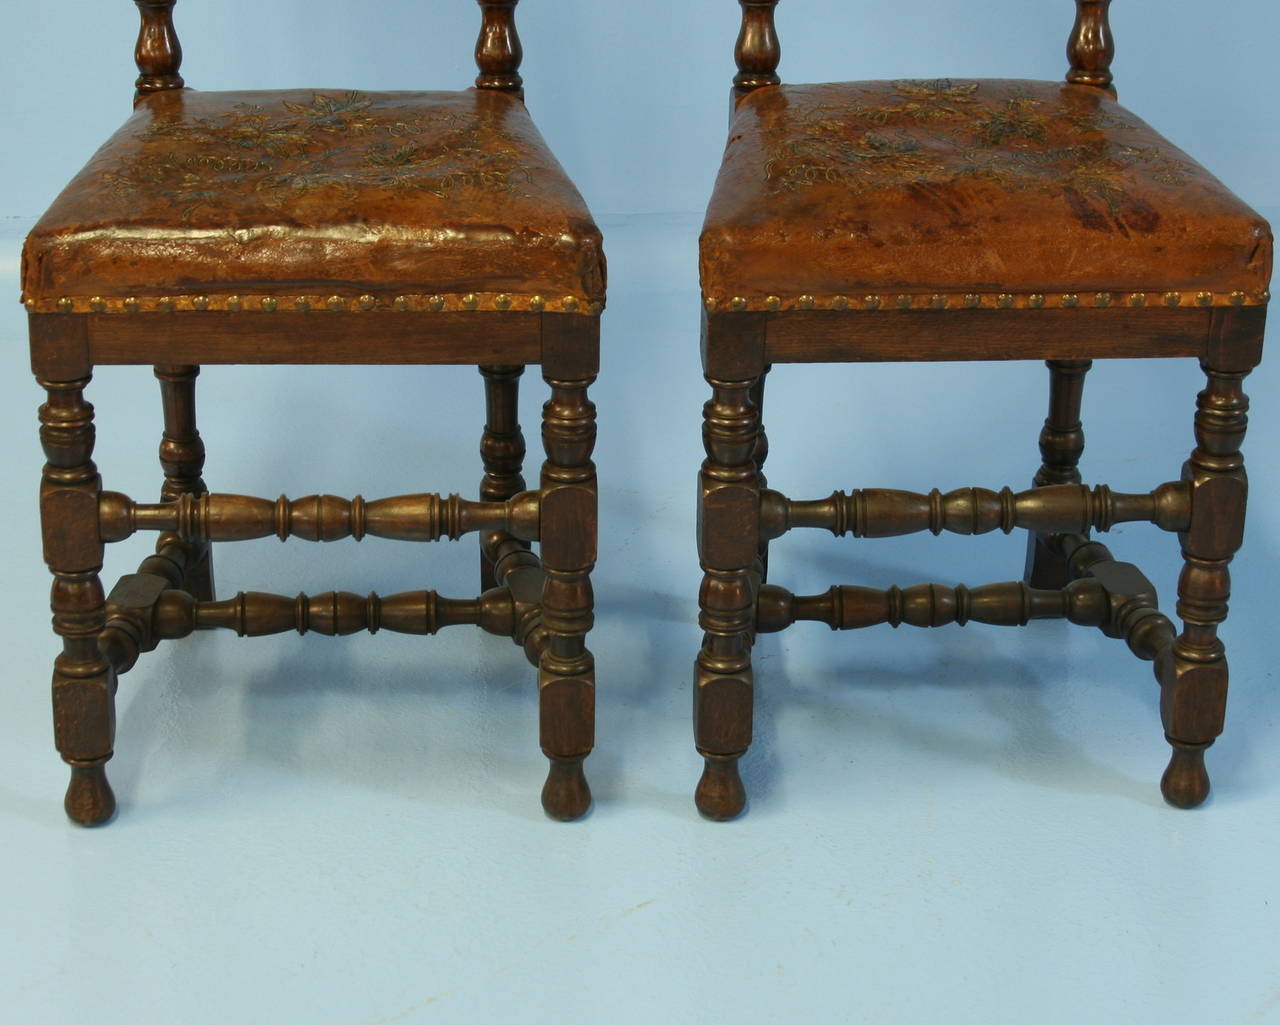 Danish Pair, Antique Leather Embossed Painted High Back Chairs, Denmark circa 1850